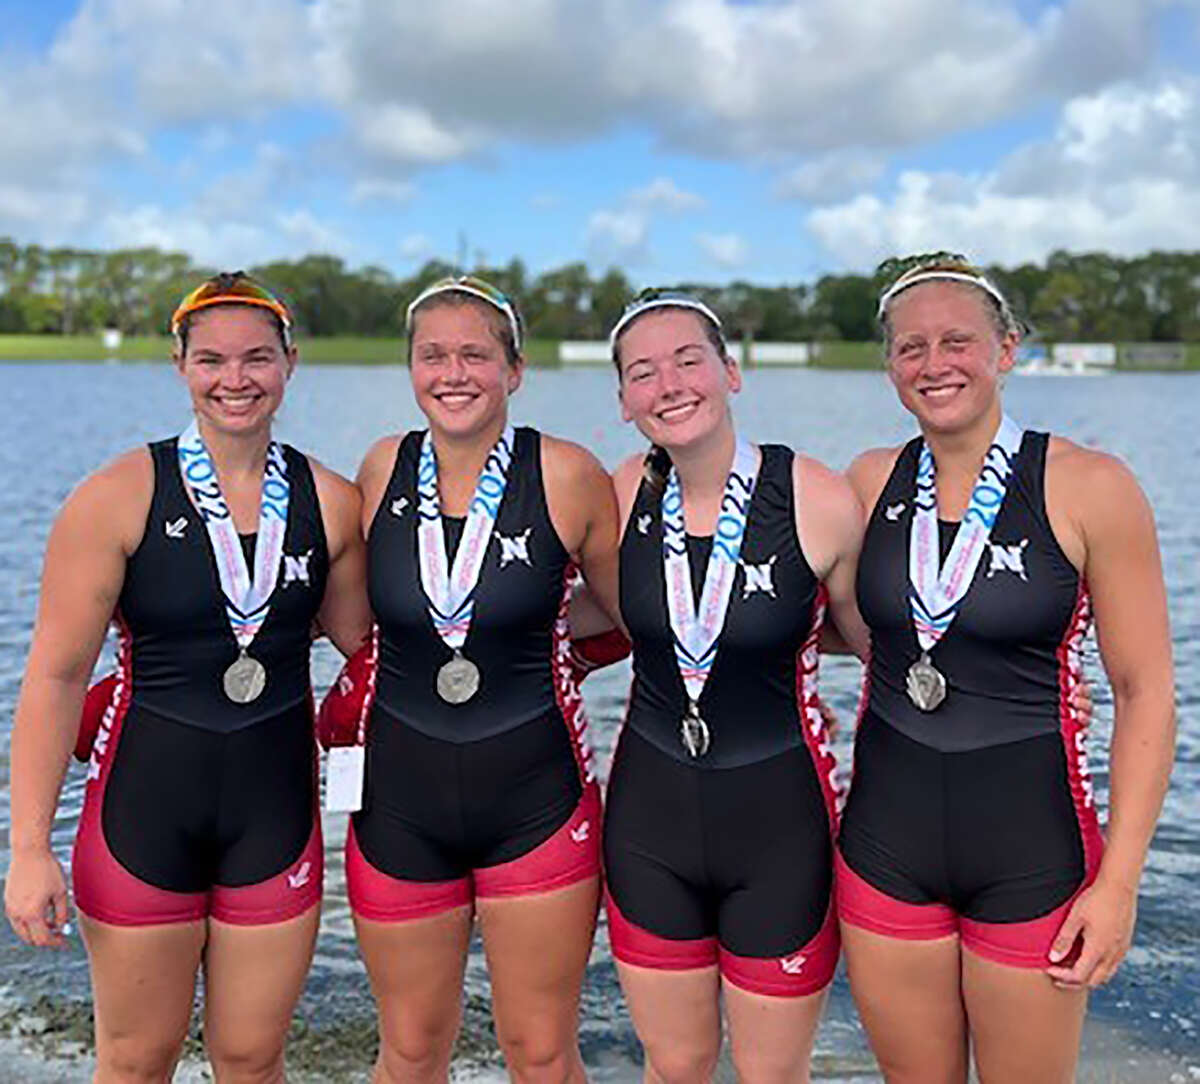 The quad (4x) women's youth silver medalists from Niskayuna Rowing Club following their finals race at the 2022 Youth Nationals Regatta. From left, Jordan Zenner, Rebecca Schmidt, Stella Mirković, and Heather Schmidt.